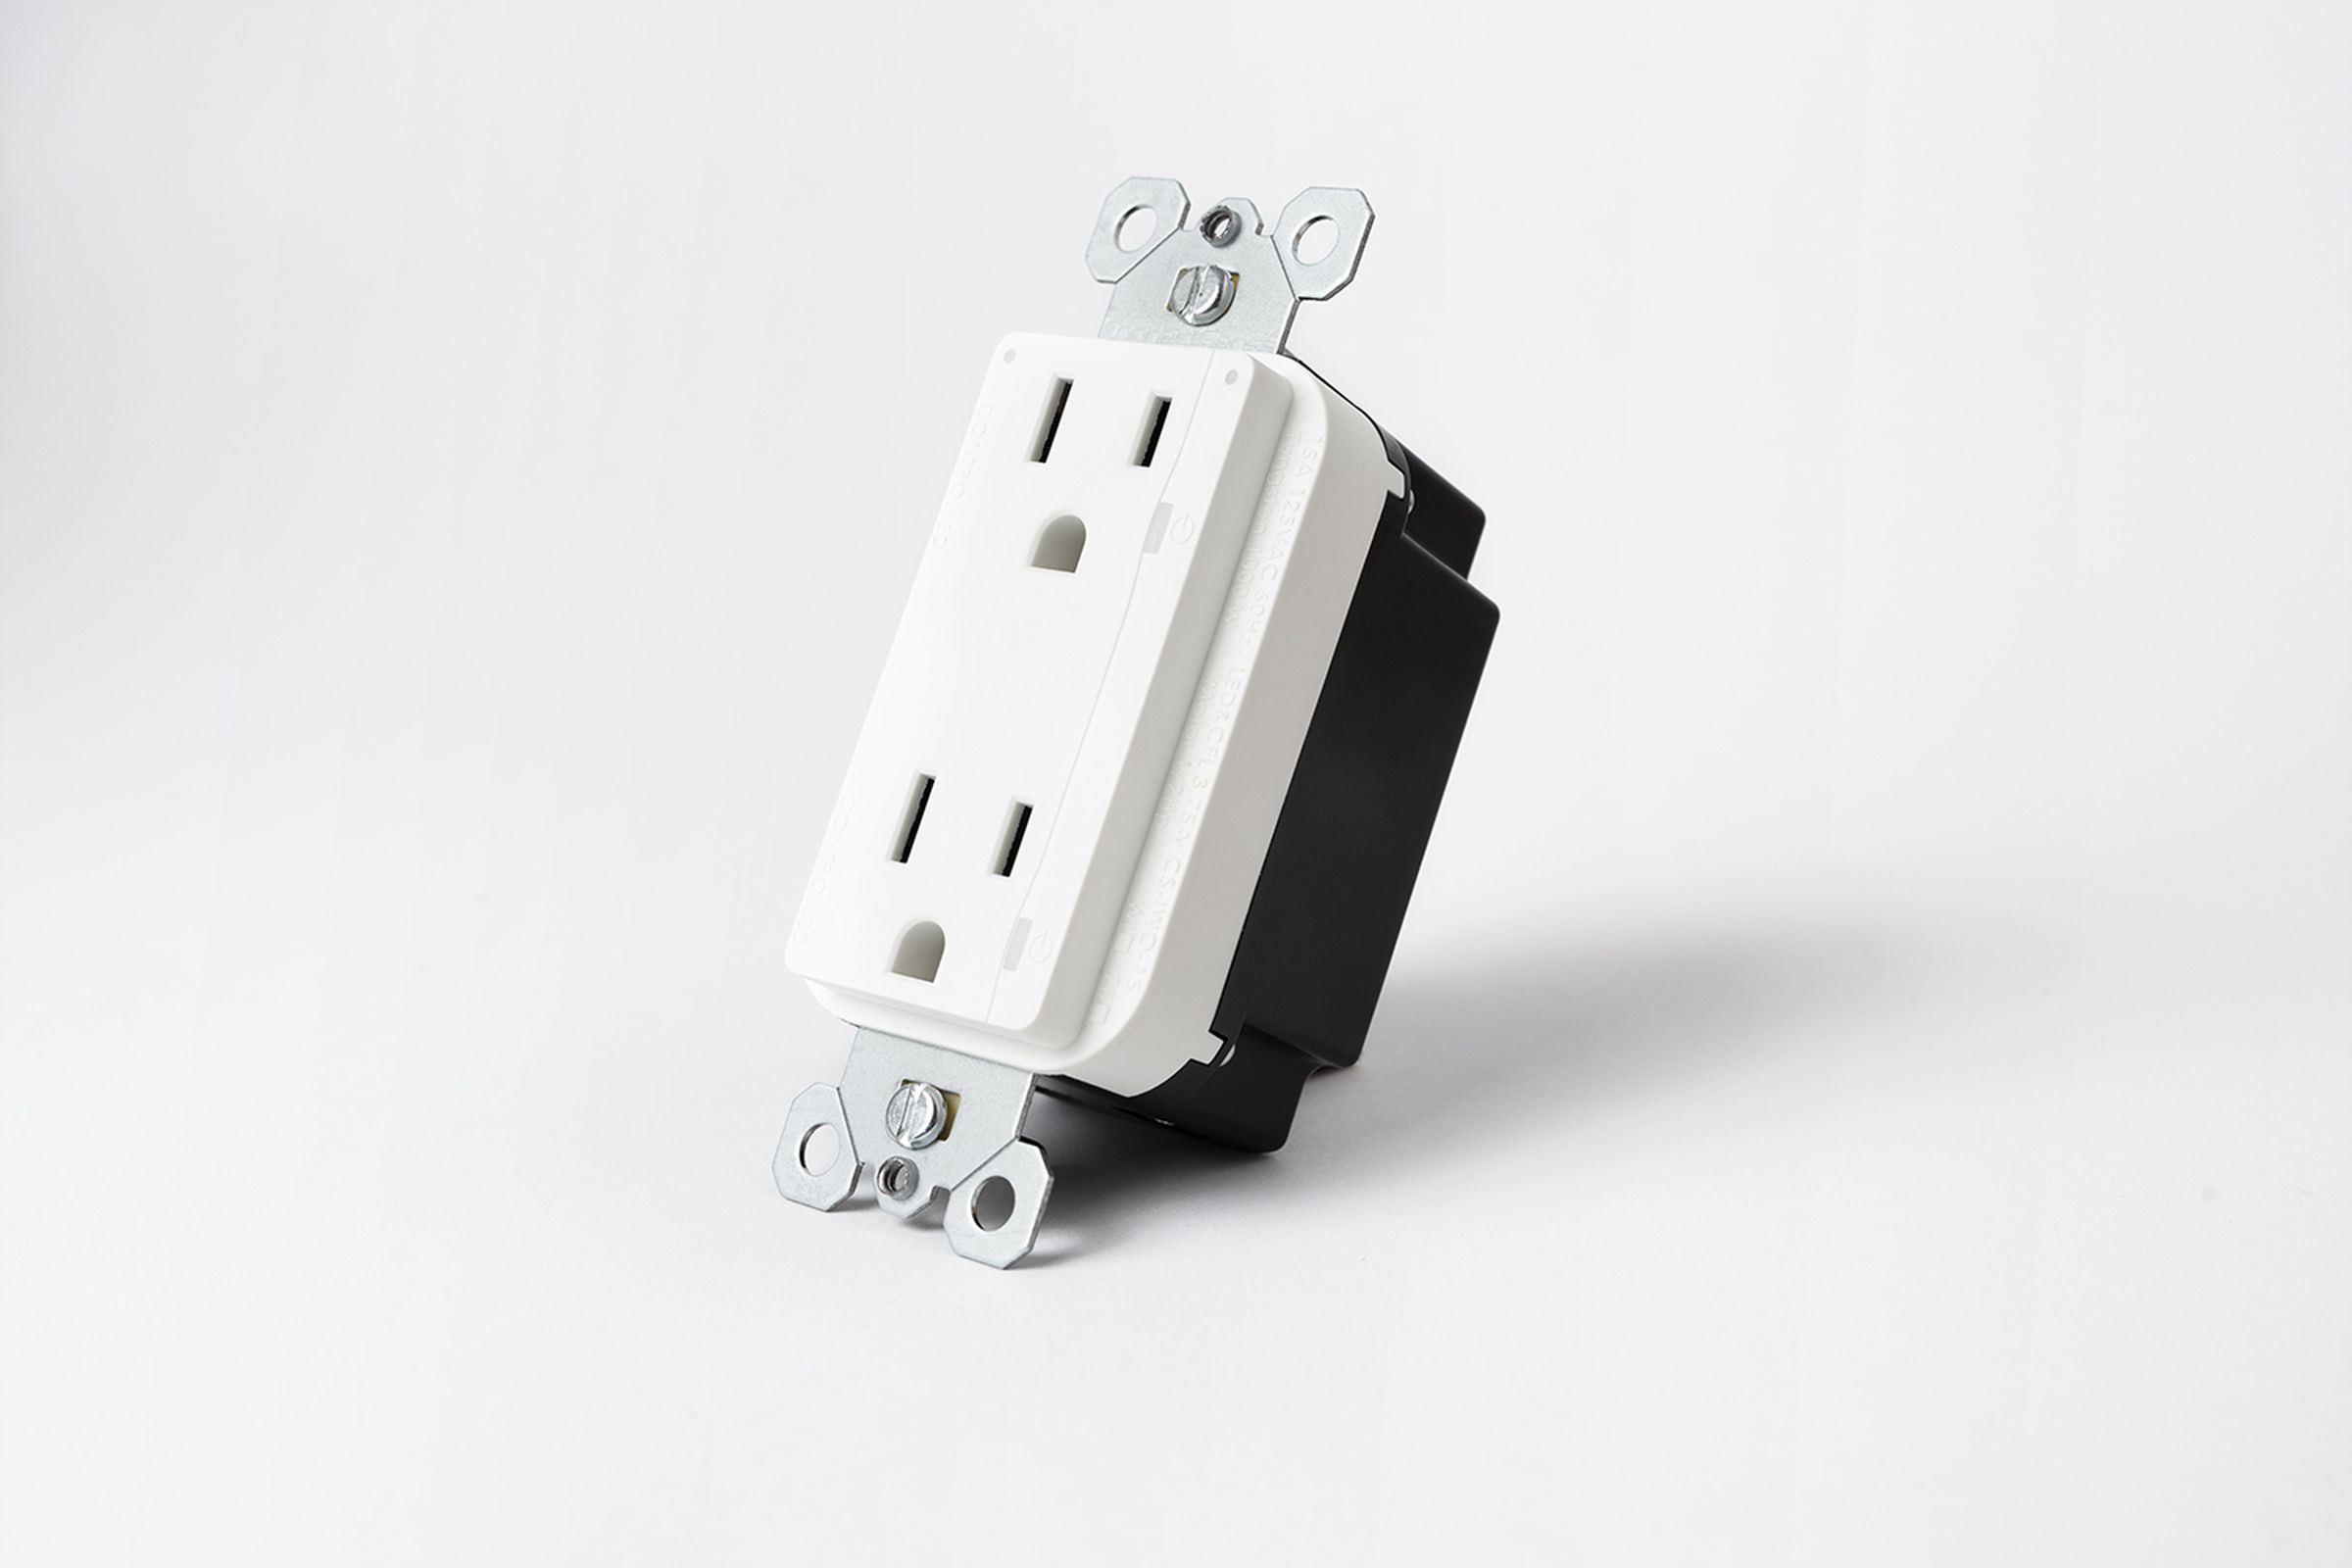 The Smart In-Wall Outlet installs directly into your walls, replacing your existing outlet.